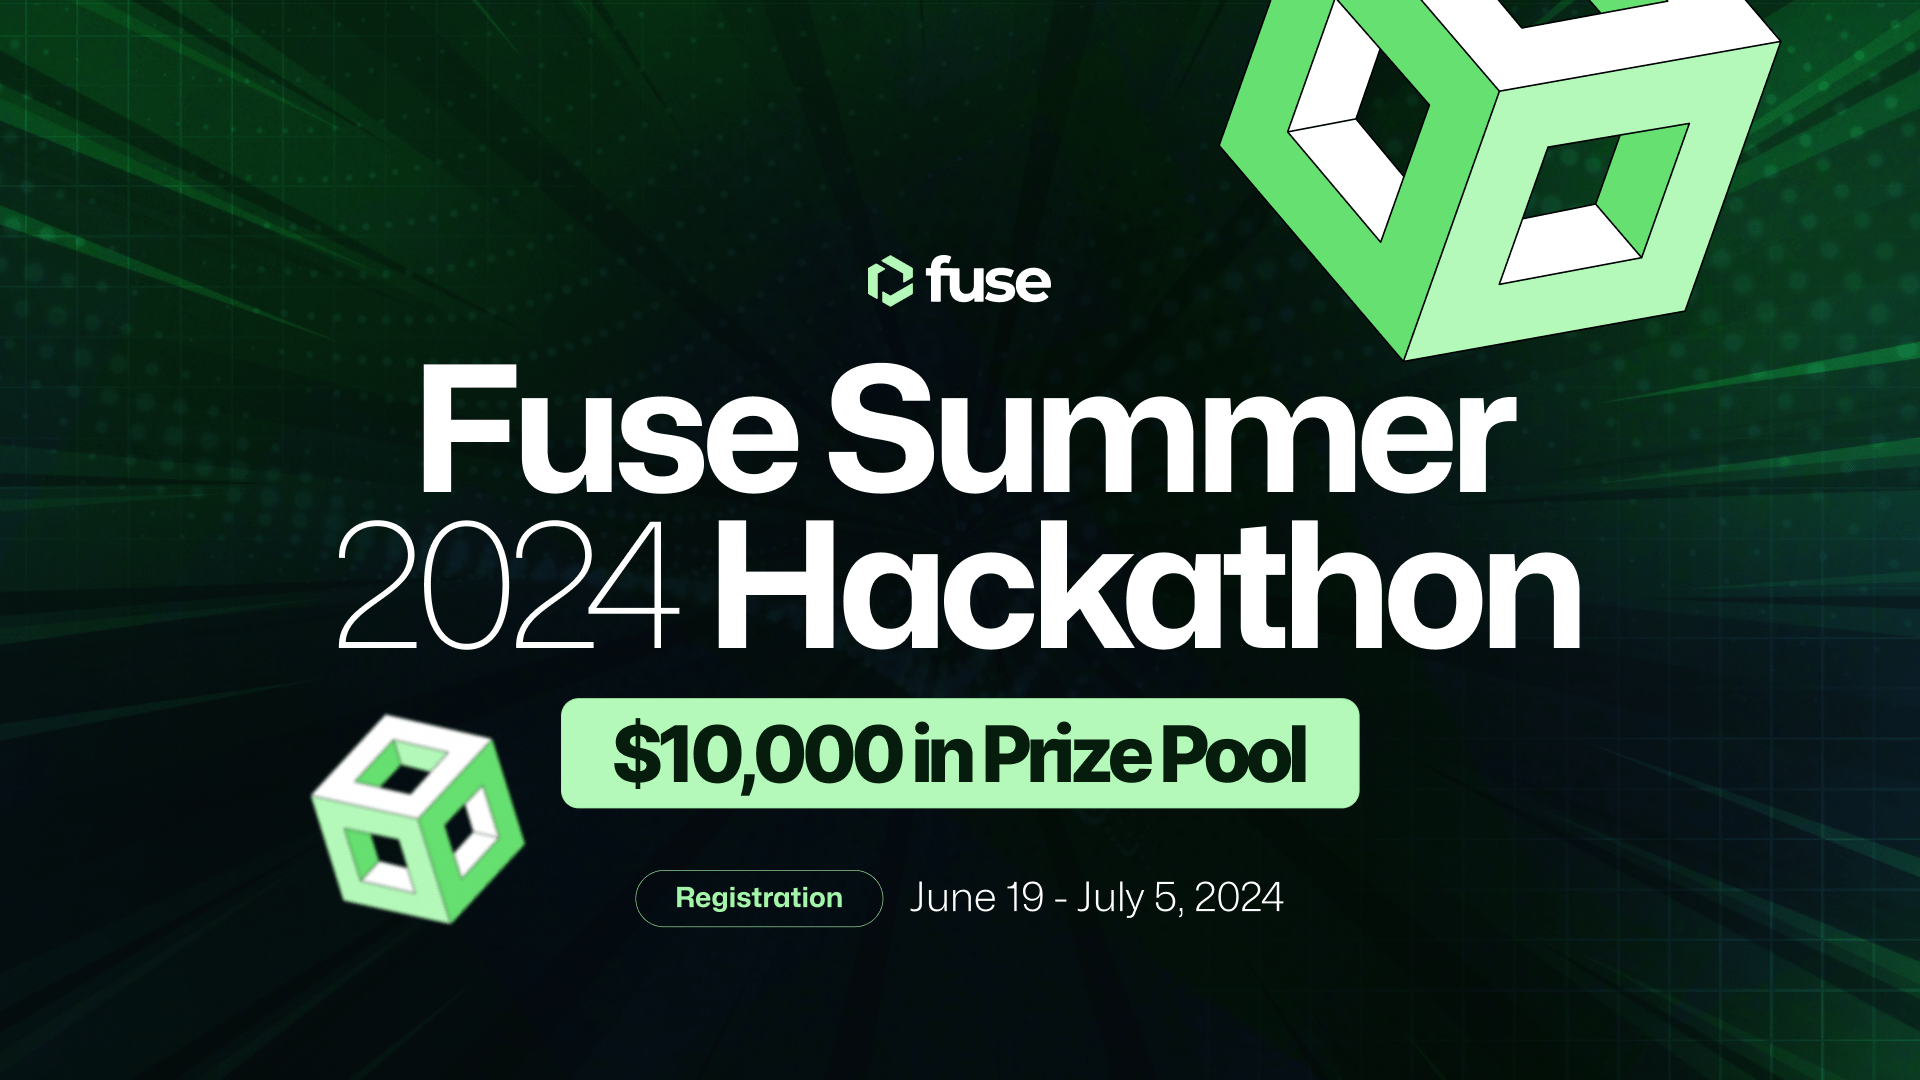 We are thrilled to announce the Fuse Summer Hackathon 2024!